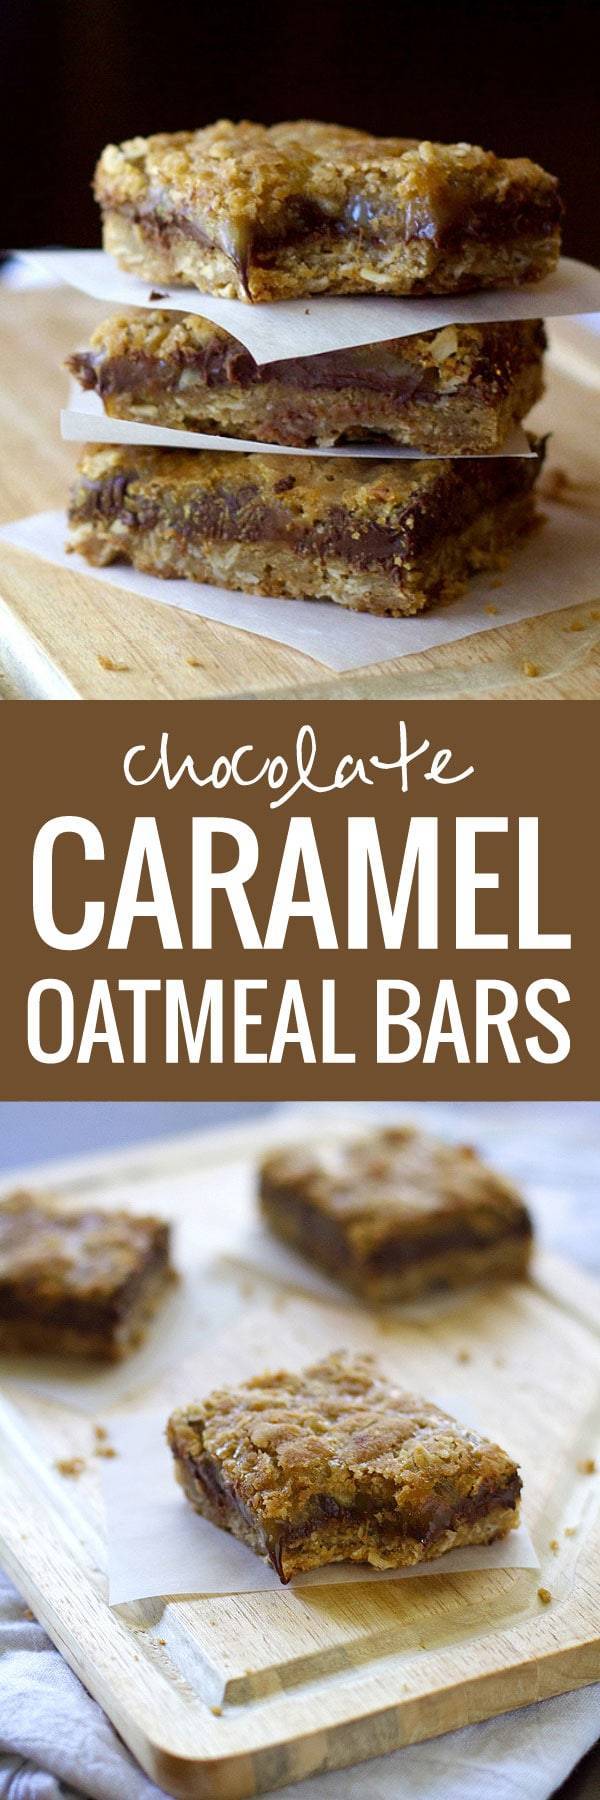 Chocolate Caramel Oatmeal Bars with an ooey-gooey-chocolate-caramel middle layer, and a buttery-soft oatmeal cookie crust.